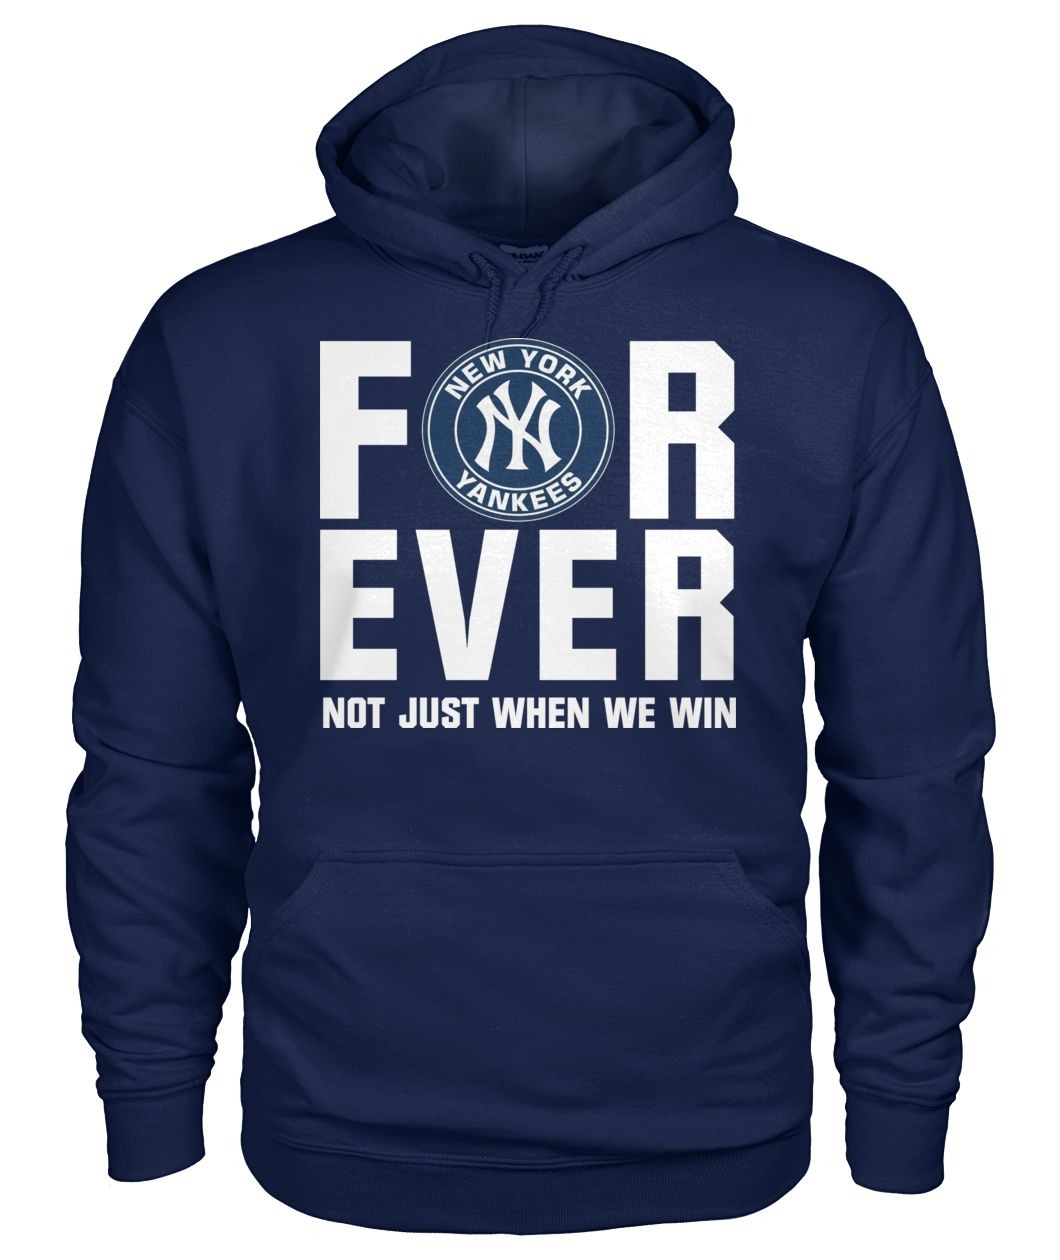 New York Yankees forever not just when we win shirt 4